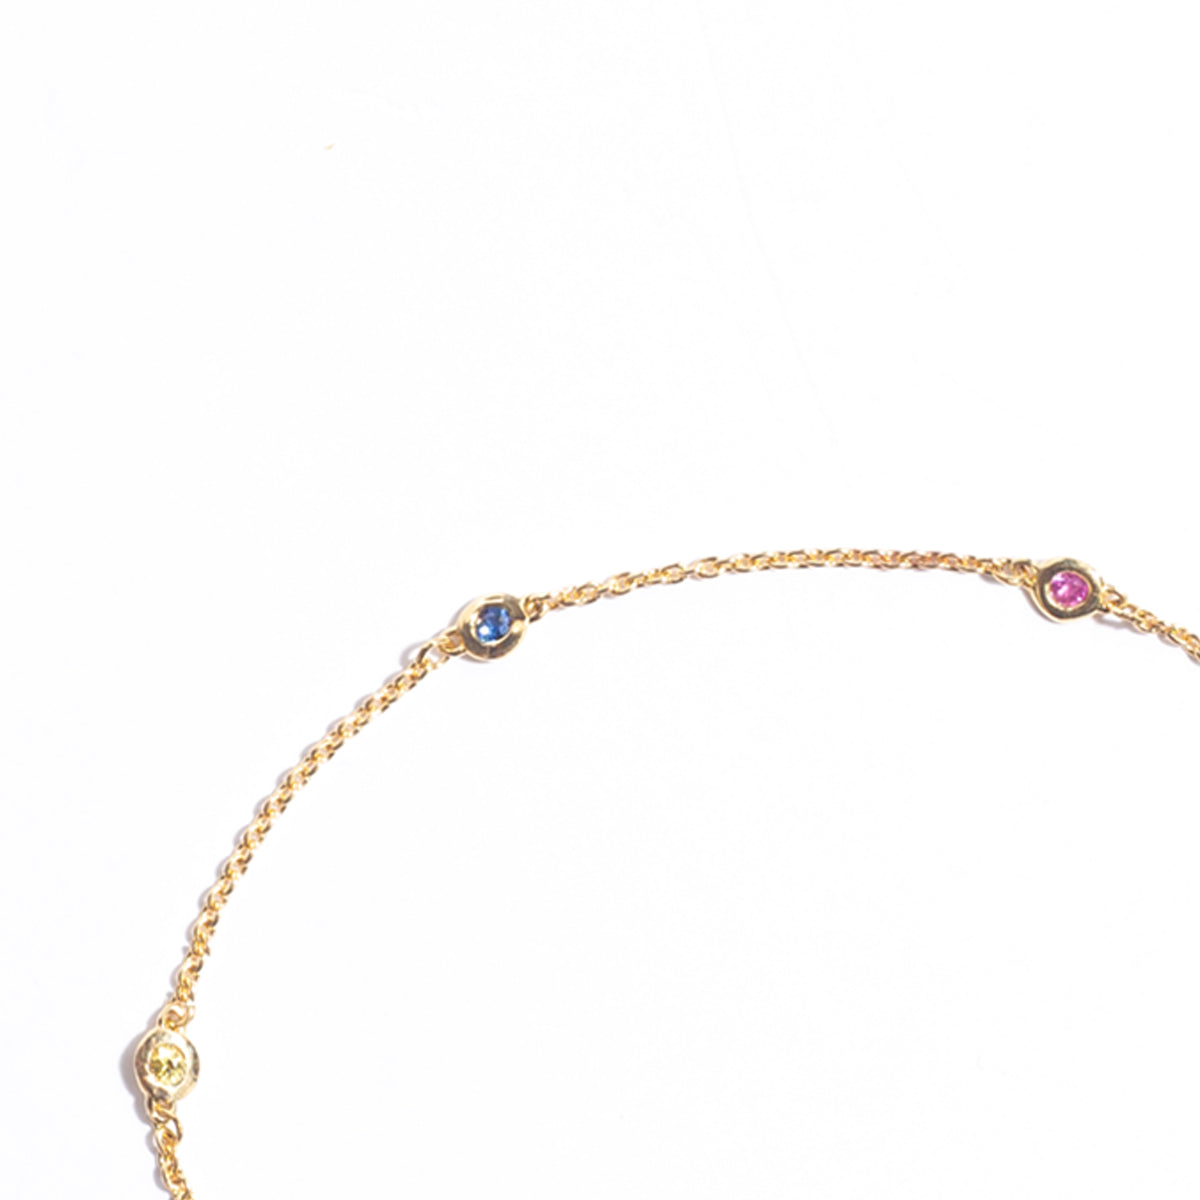 Yellow gold and sapphire chain Bracelet